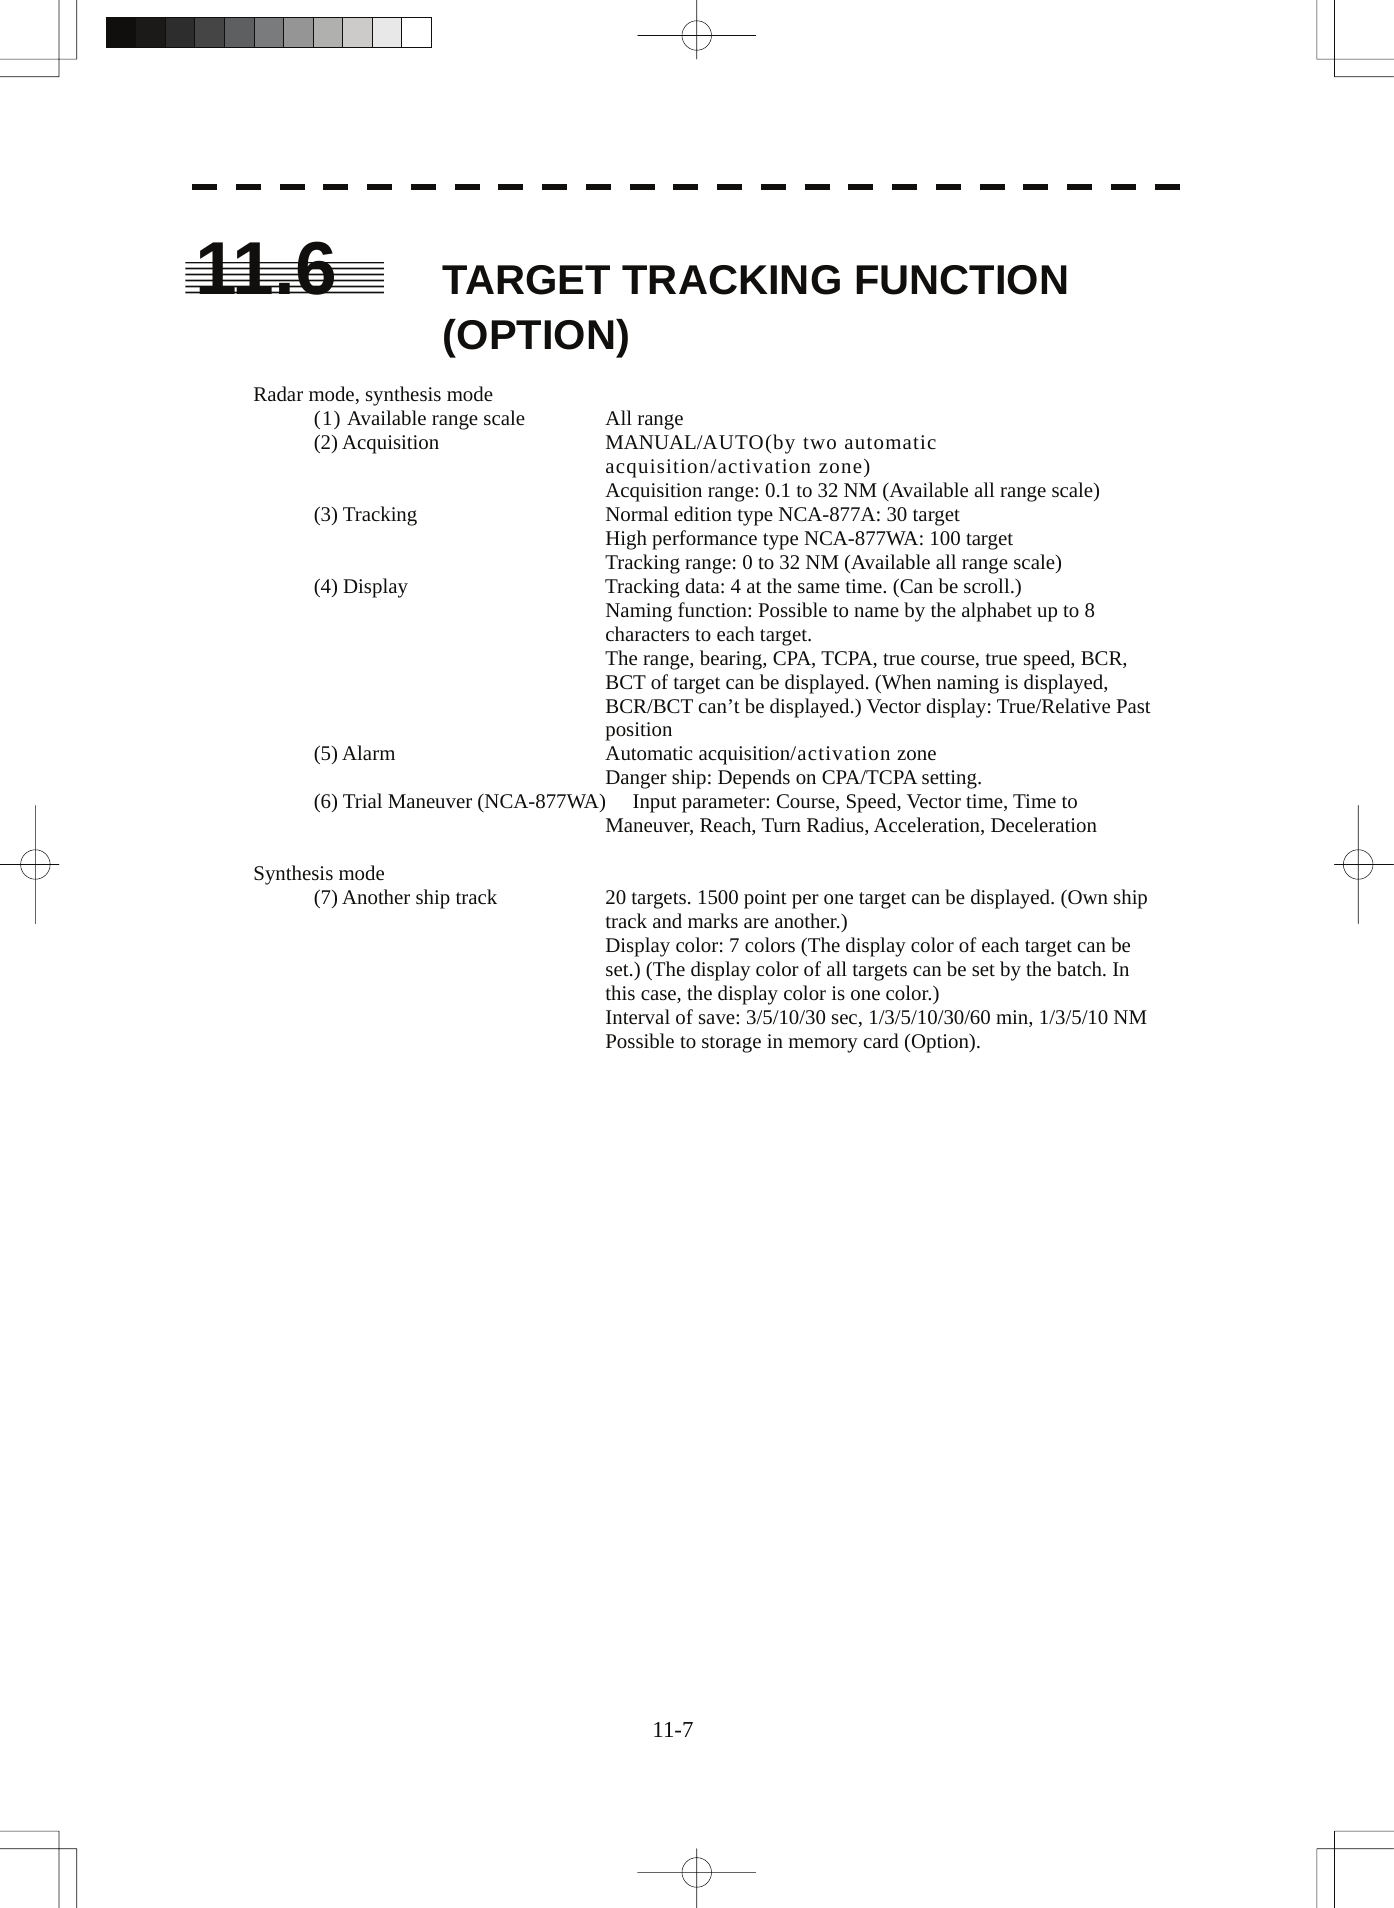  11-7 11.6  TARGET TRACKING FUNCTION (OPTION)  Radar mode, synthesis mode (1) Available range scale  All range (2) Acquisition  MANUAL/AUTO(by two automatic acquisition/activation zone) Acquisition range: 0.1 to 32 NM (Available all range scale) (3) Tracking  Normal edition type NCA-877A: 30 target High performance type NCA-877WA: 100 target Tracking range: 0 to 32 NM (Available all range scale) (4) Display  Tracking data: 4 at the same time. (Can be scroll.) Naming function: Possible to name by the alphabet up to 8 characters to each target. The range, bearing, CPA, TCPA, true course, true speed, BCR, BCT of target can be displayed. (When naming is displayed, BCR/BCT can’t be displayed.) Vector display: True/Relative Past position (5) Alarm  Automatic acquisition/activation zone Danger ship: Depends on CPA/TCPA setting. (6) Trial Maneuver (NCA-877WA)  Input parameter: Course, Speed, Vector time, Time to Maneuver, Reach, Turn Radius, Acceleration, Deceleration  Synthesis mode (7) Another ship track  20 targets. 1500 point per one target can be displayed. (Own ship track and marks are another.) Display color: 7 colors (The display color of each target can be set.) (The display color of all targets can be set by the batch. In this case, the display color is one color.) Interval of save: 3/5/10/30 sec, 1/3/5/10/30/60 min, 1/3/5/10 NM Possible to storage in memory card (Option).   